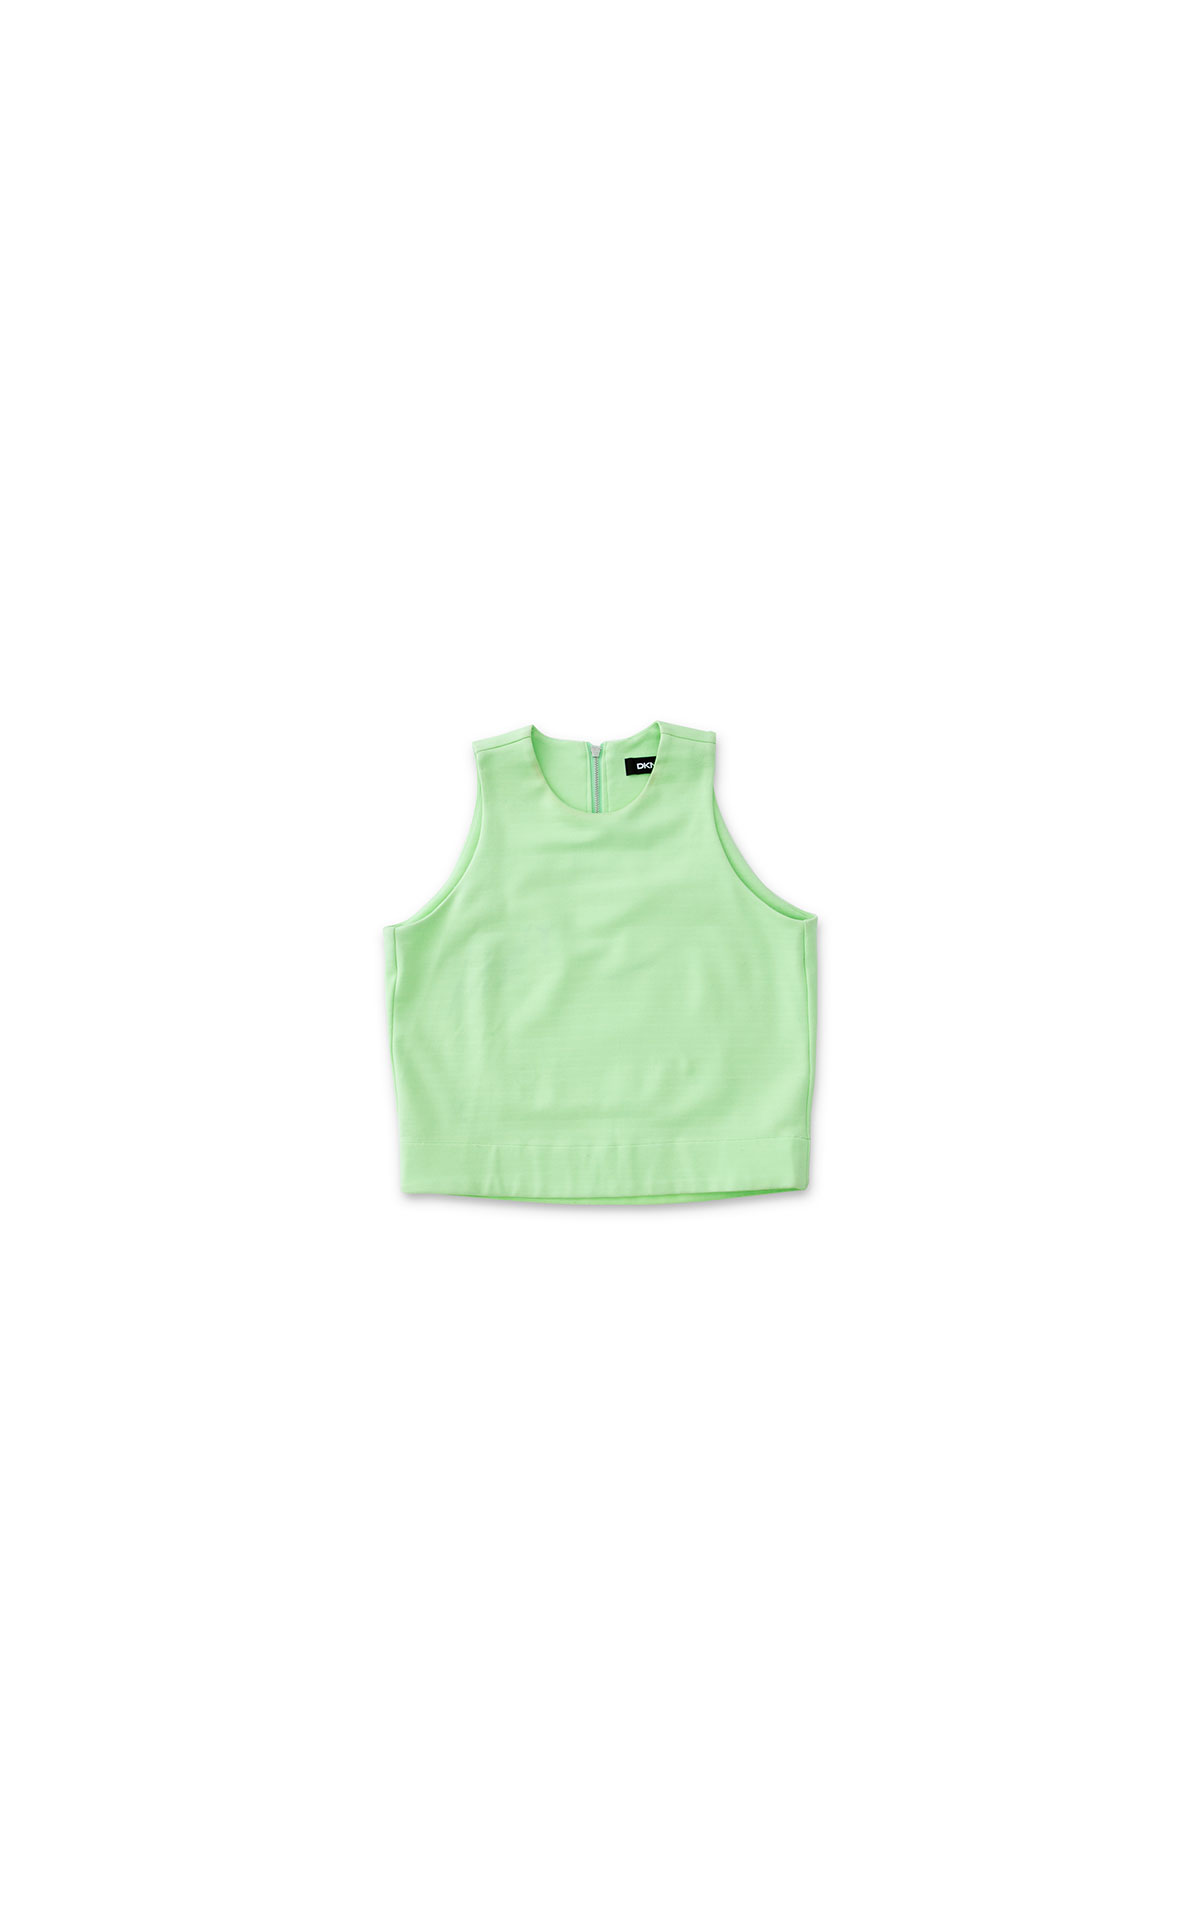 DKNY Green top from Bicester Village